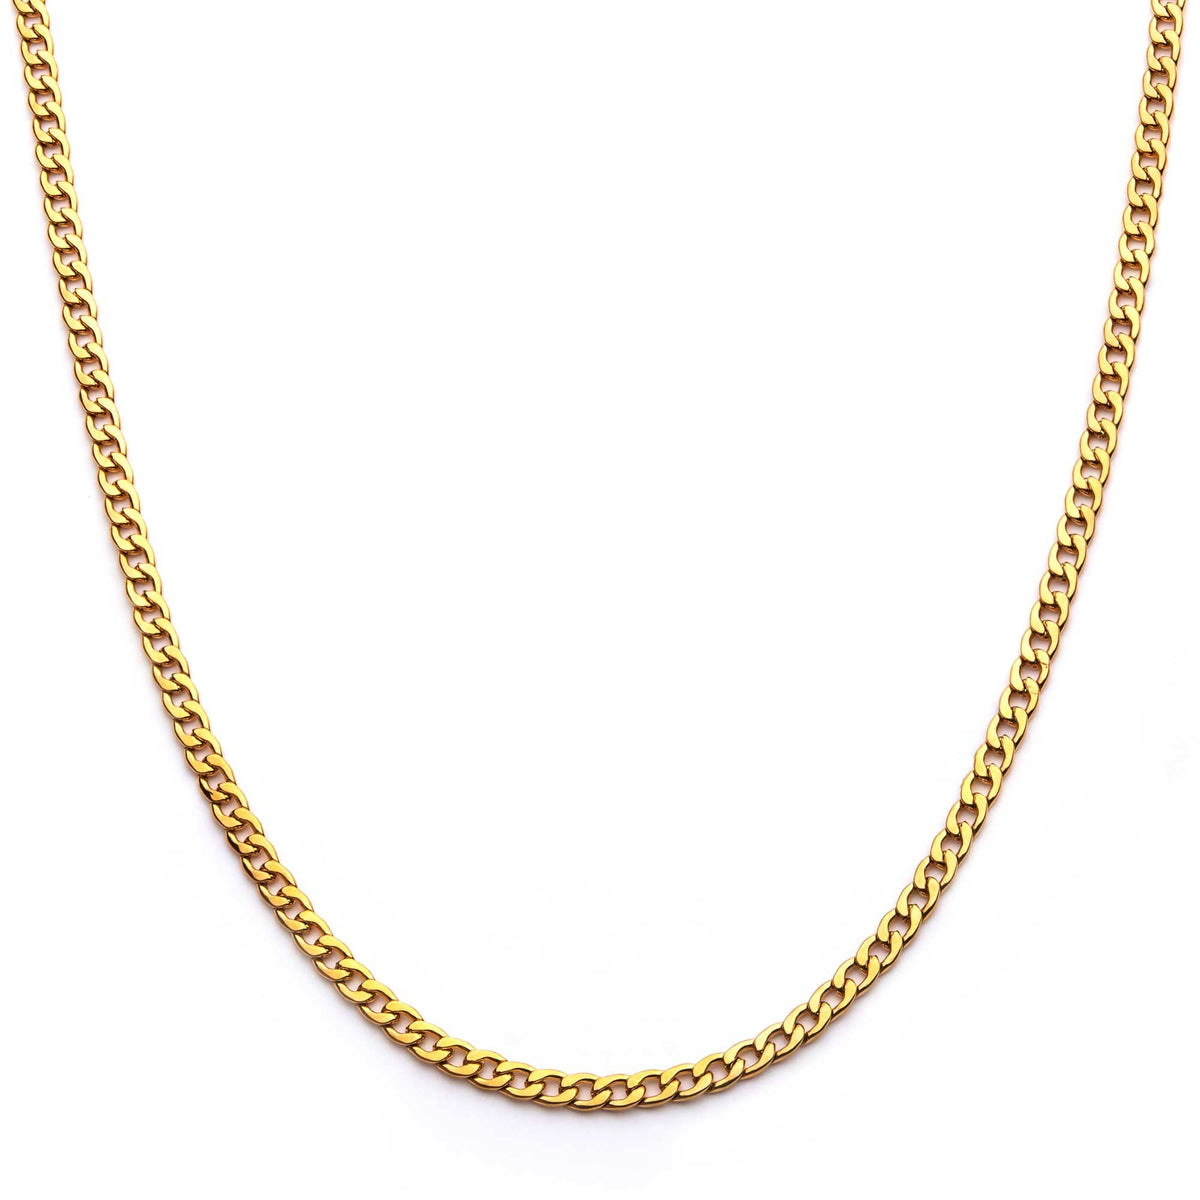 INOX JEWELRY Accessories 18K Gold Ion Plated Stainless Steel 4mm Curb Chain